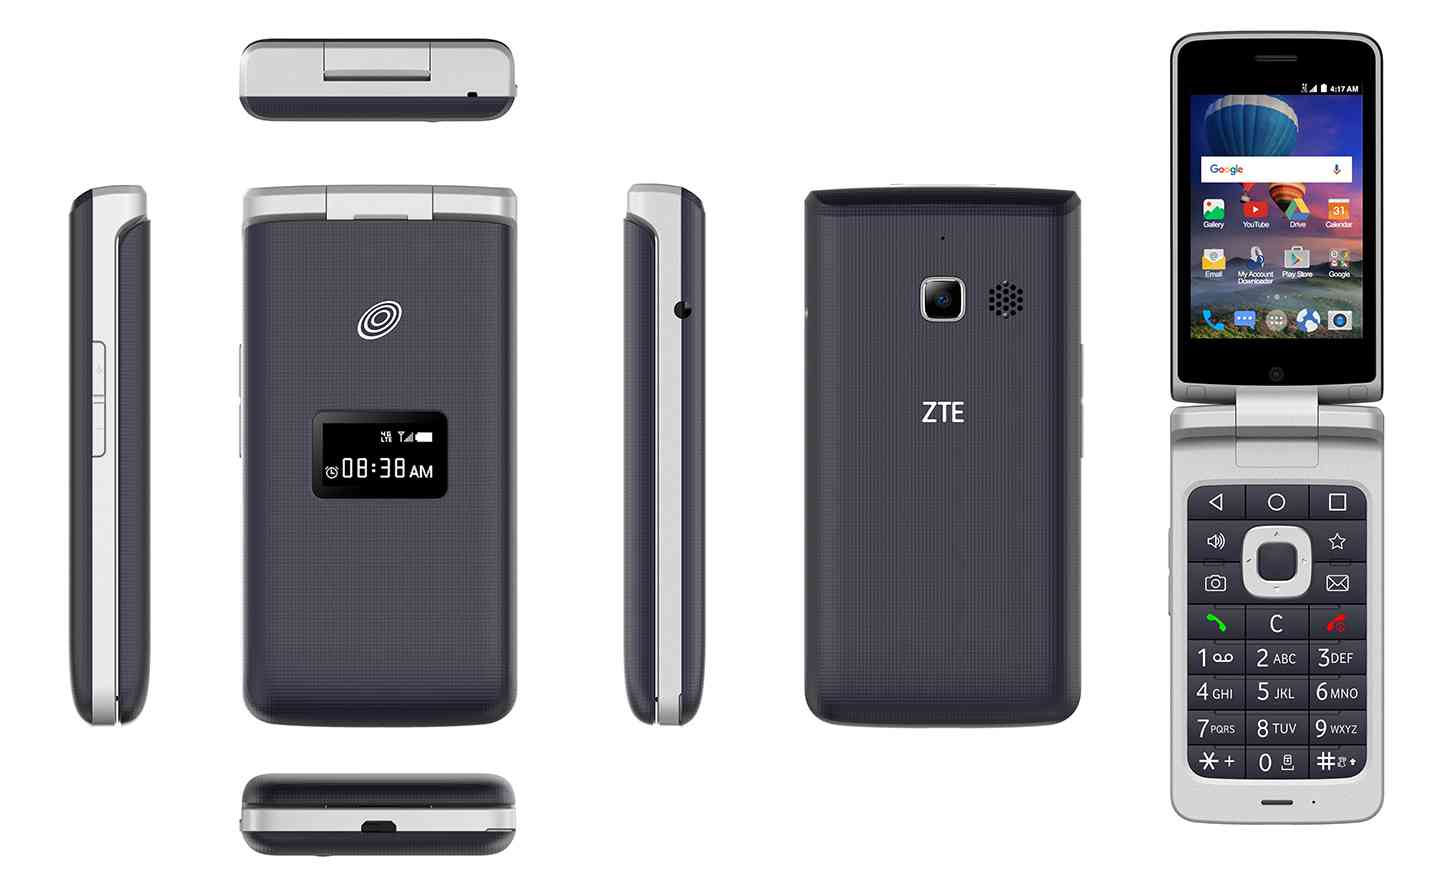 ZTE CymbalT is a new Android flip phone that's available in the US